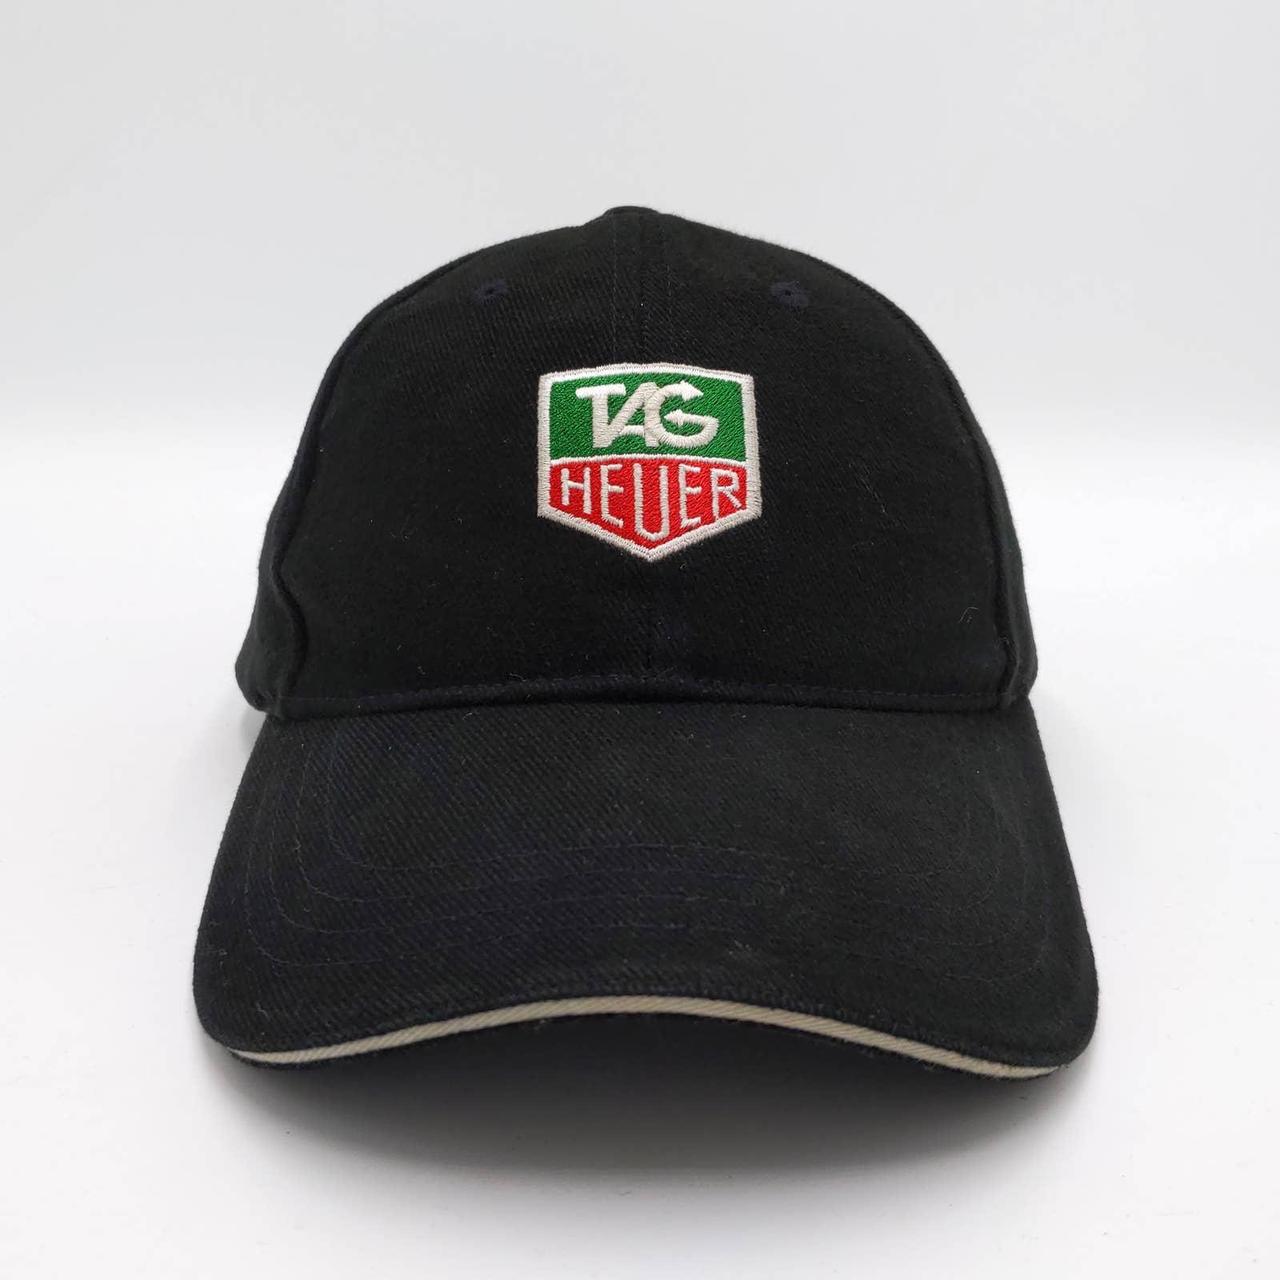 Product Image 2 - TAG Heuer Luxury Watches Hat
Color: